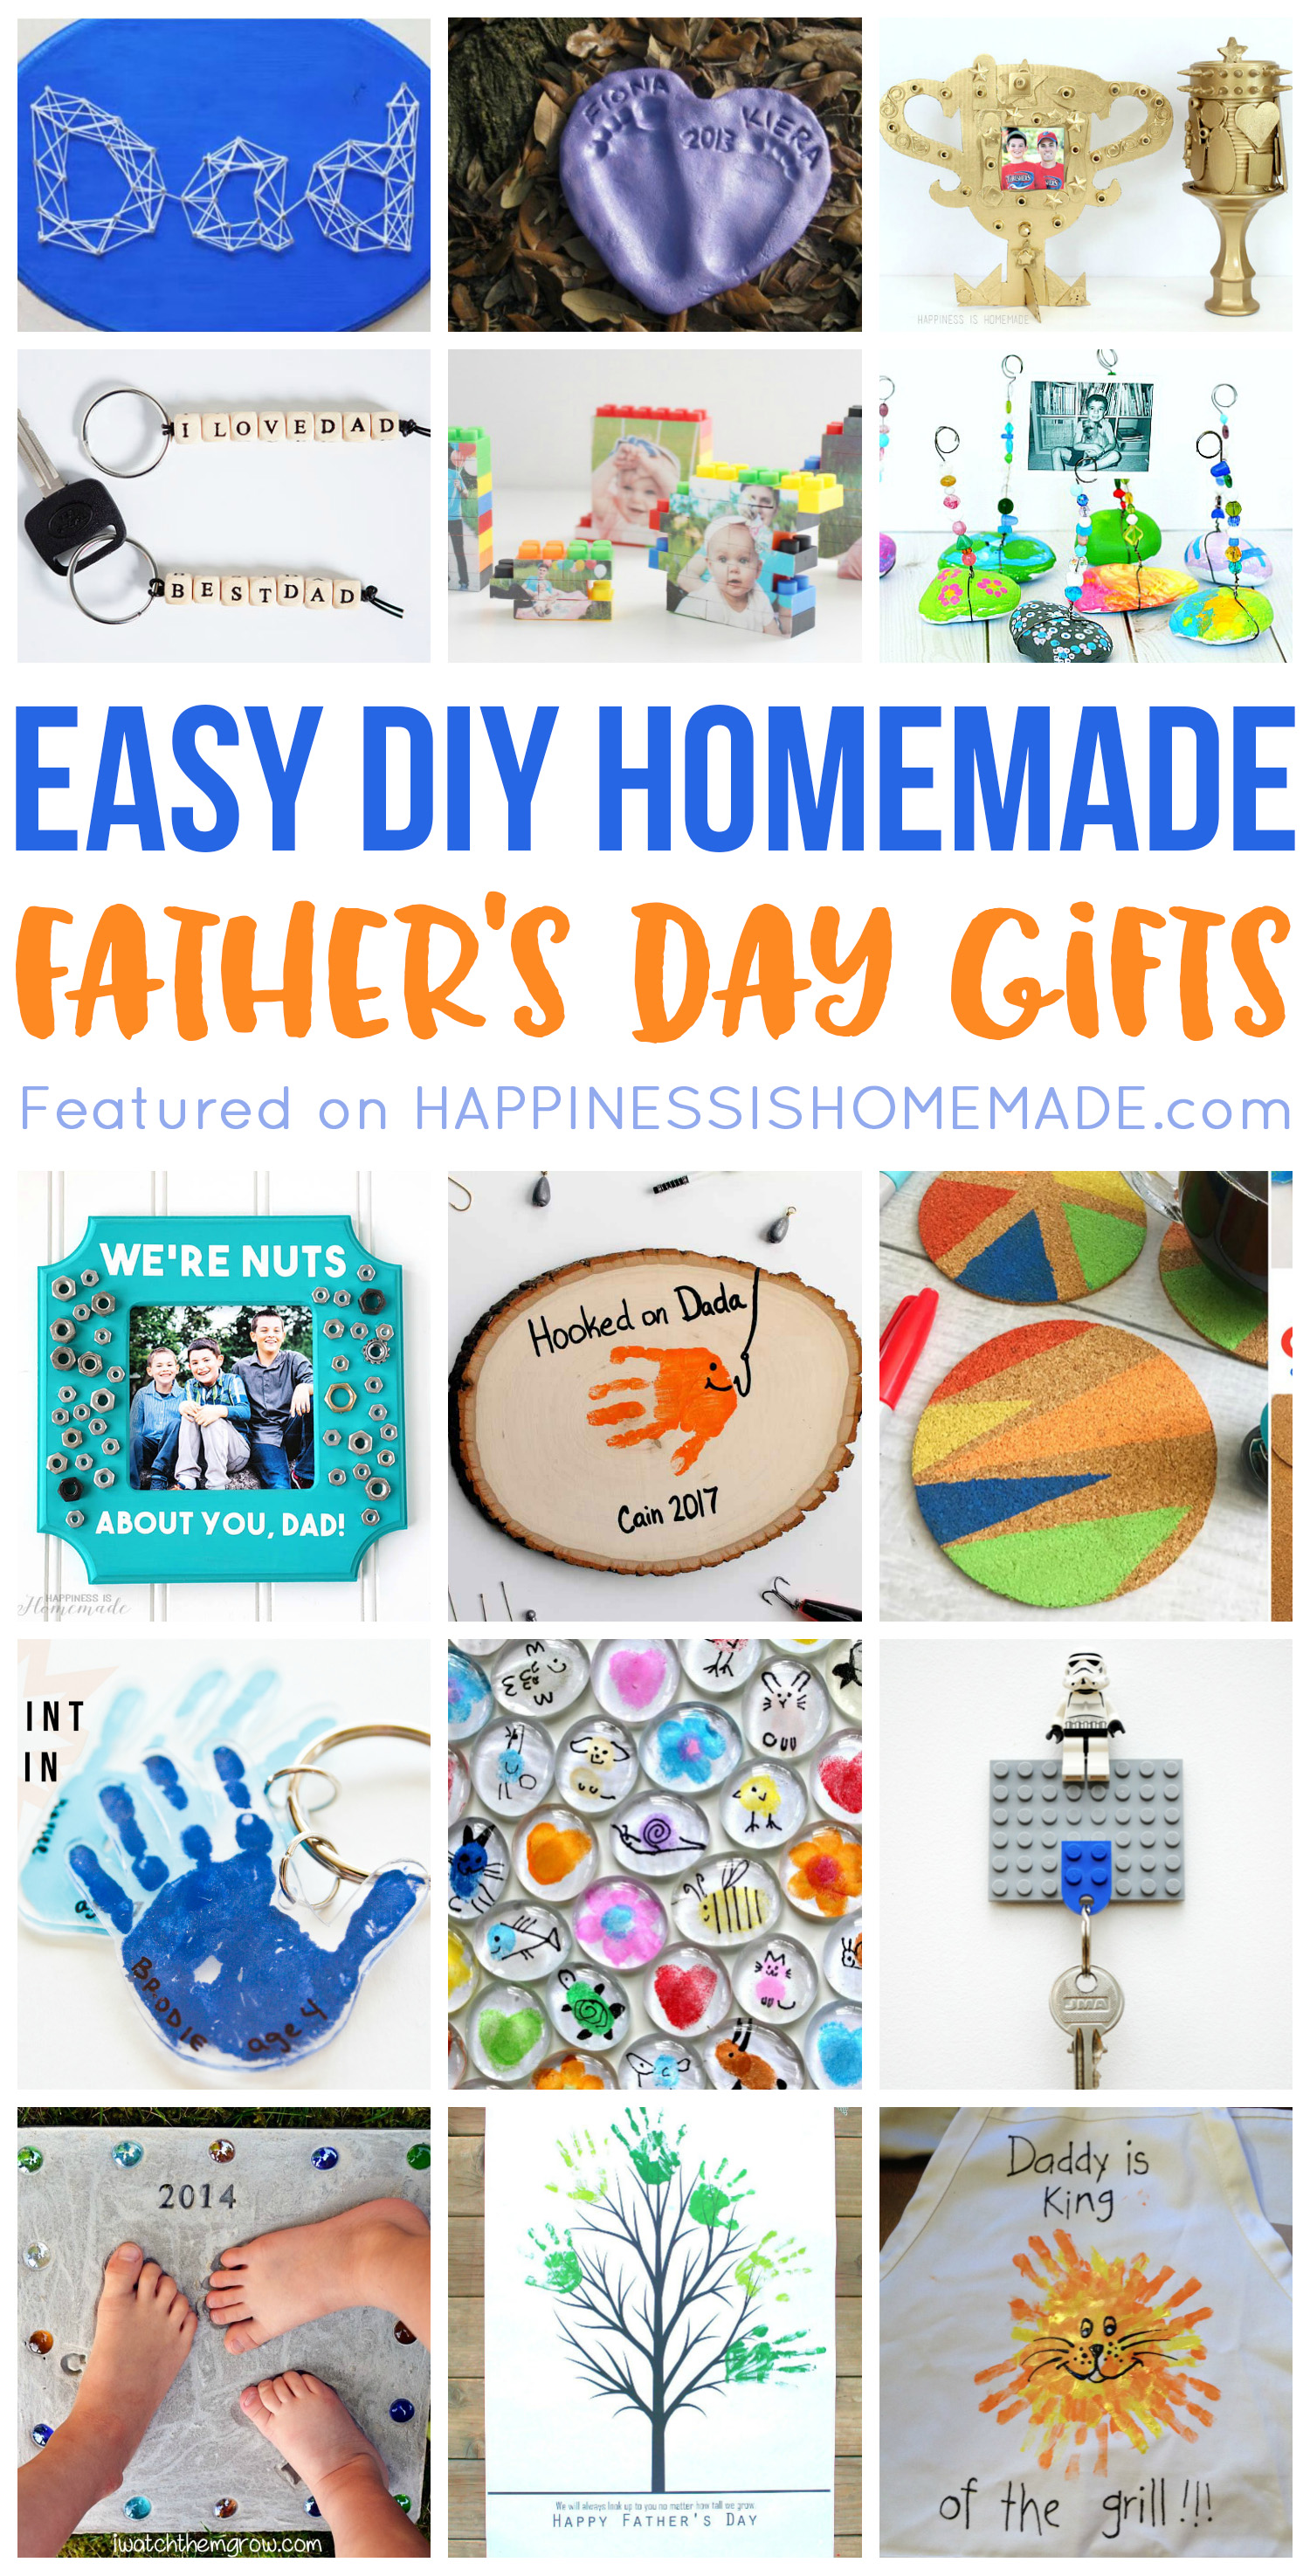 Download 20+ Homemade Father's Day Gifts That Kids Can Make ...